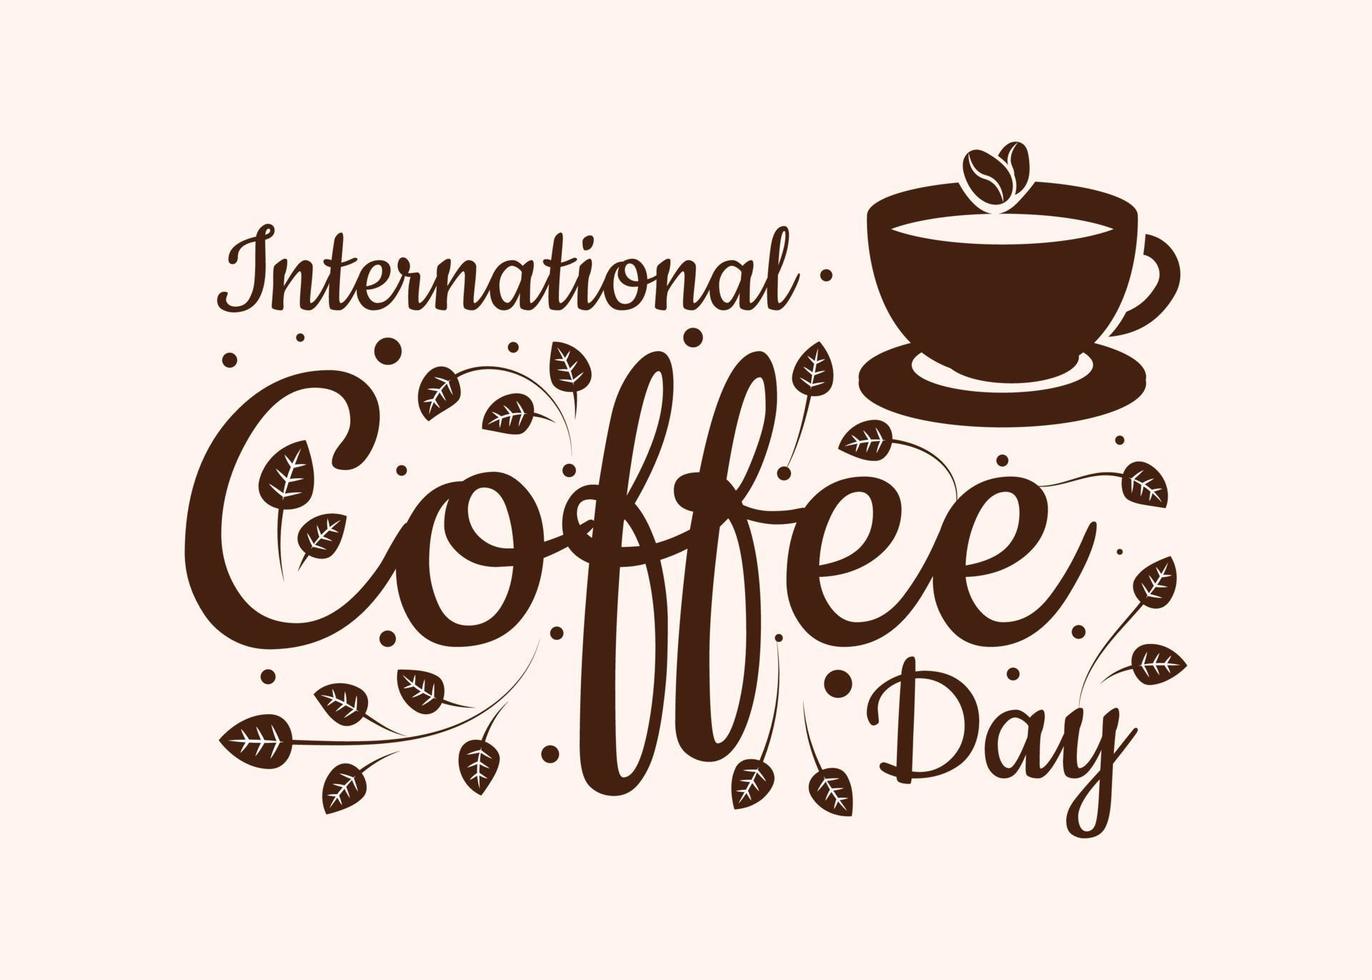 International Coffee Day. 1 October. Food event concept. handmade Lettering with the Logo of the event inscribed in the cup vector